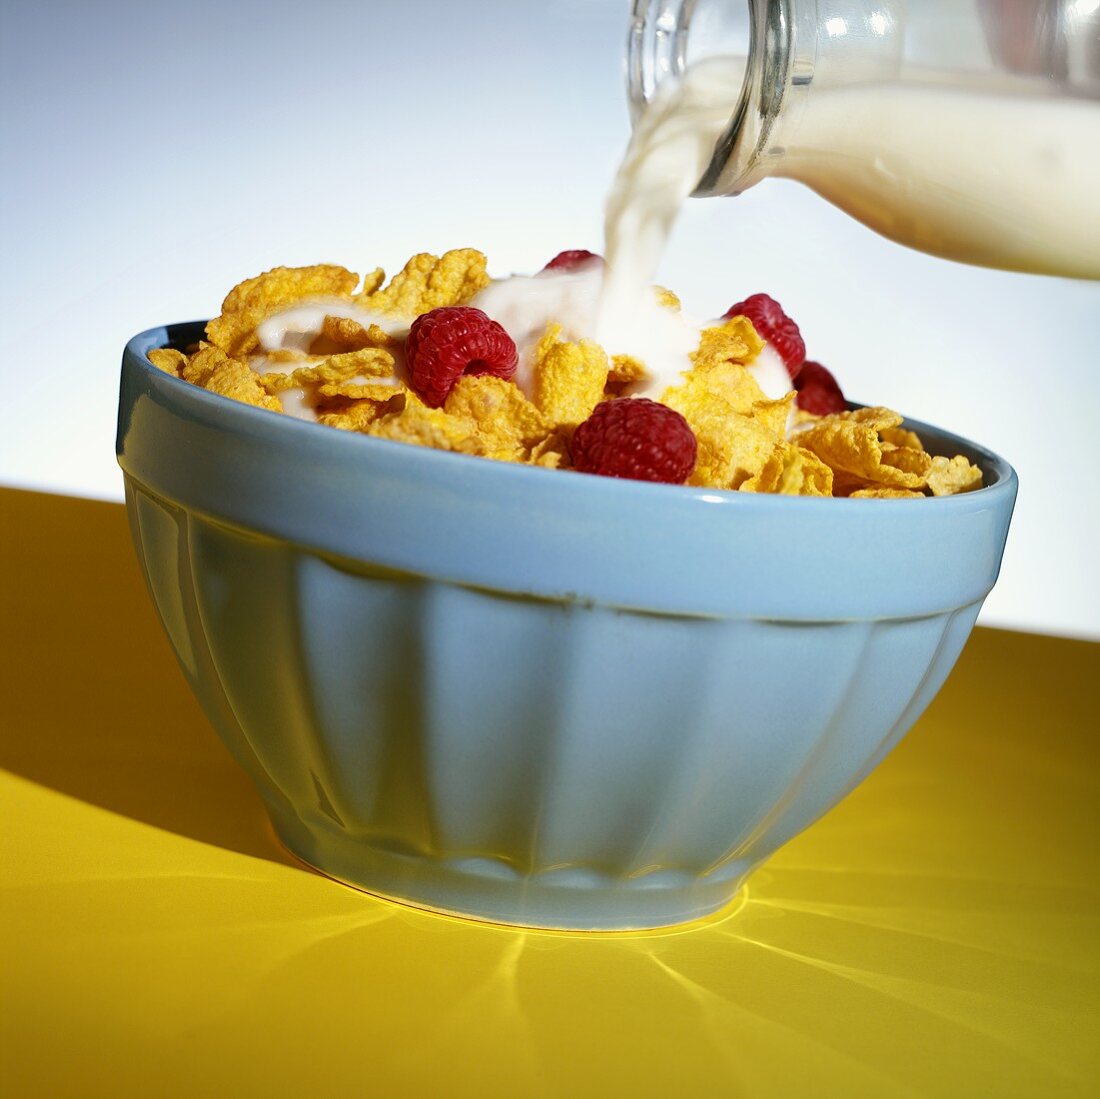 Pouring milk over cornflakes with raspberries